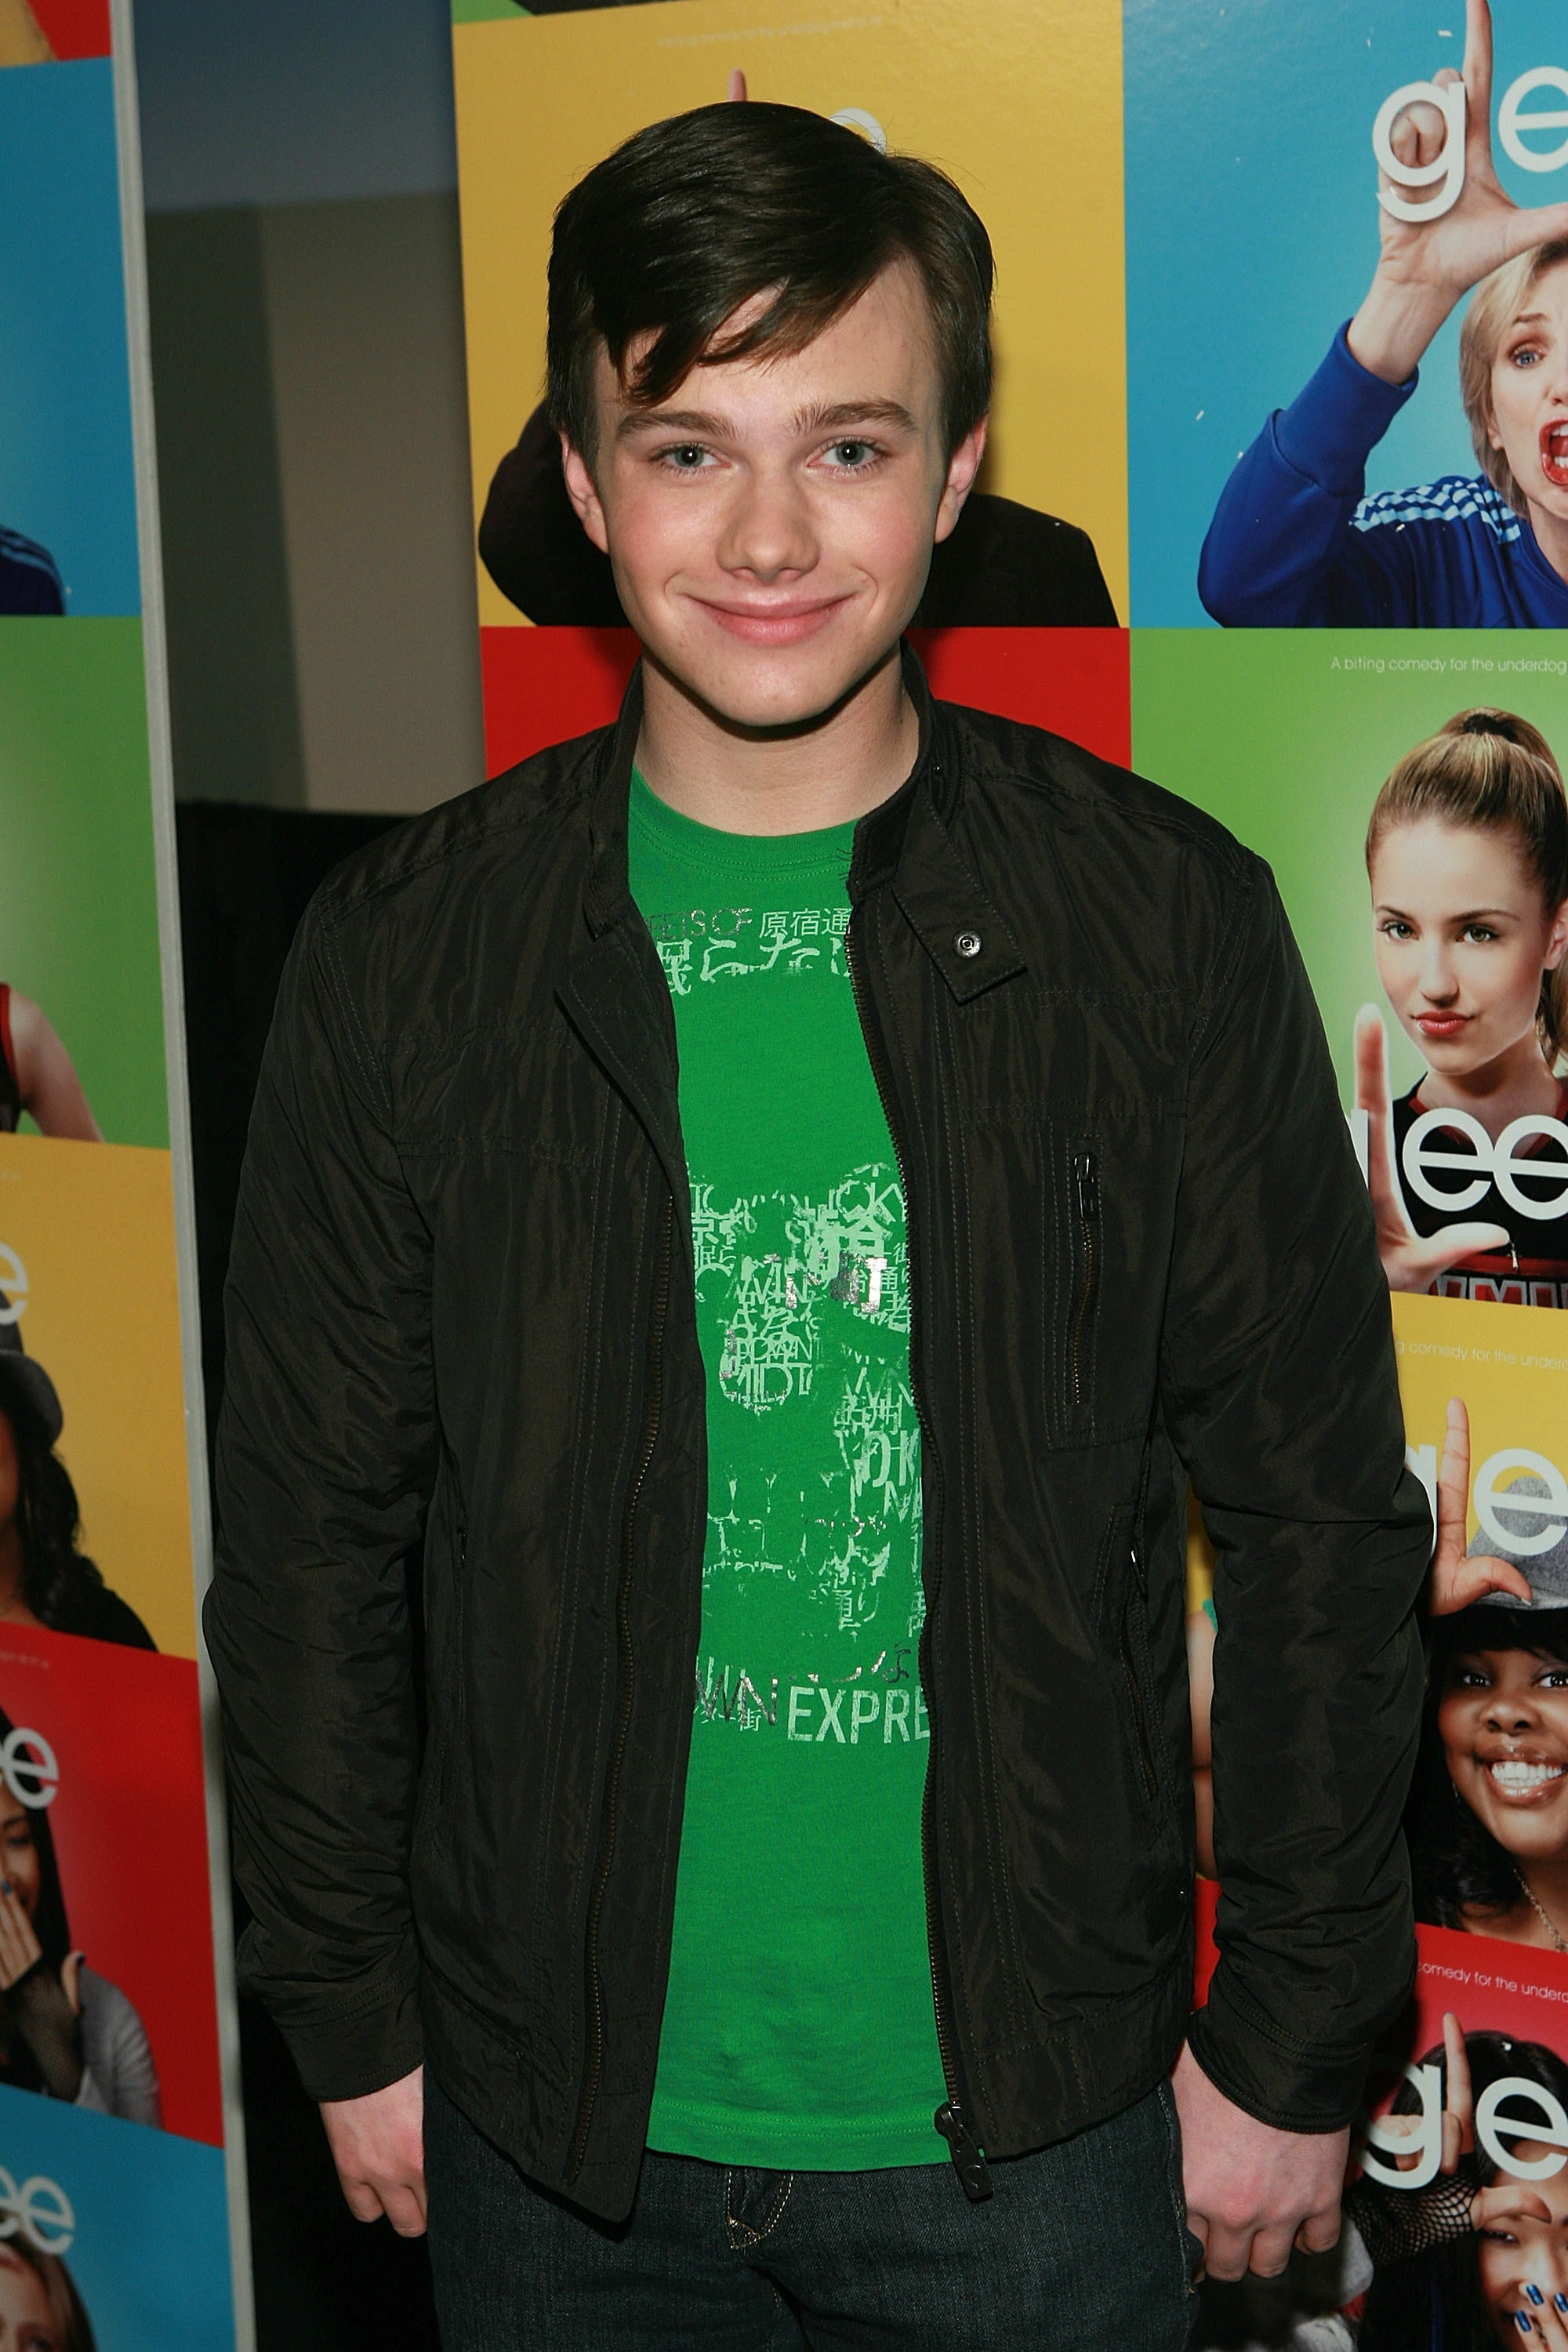 chris at a glee event